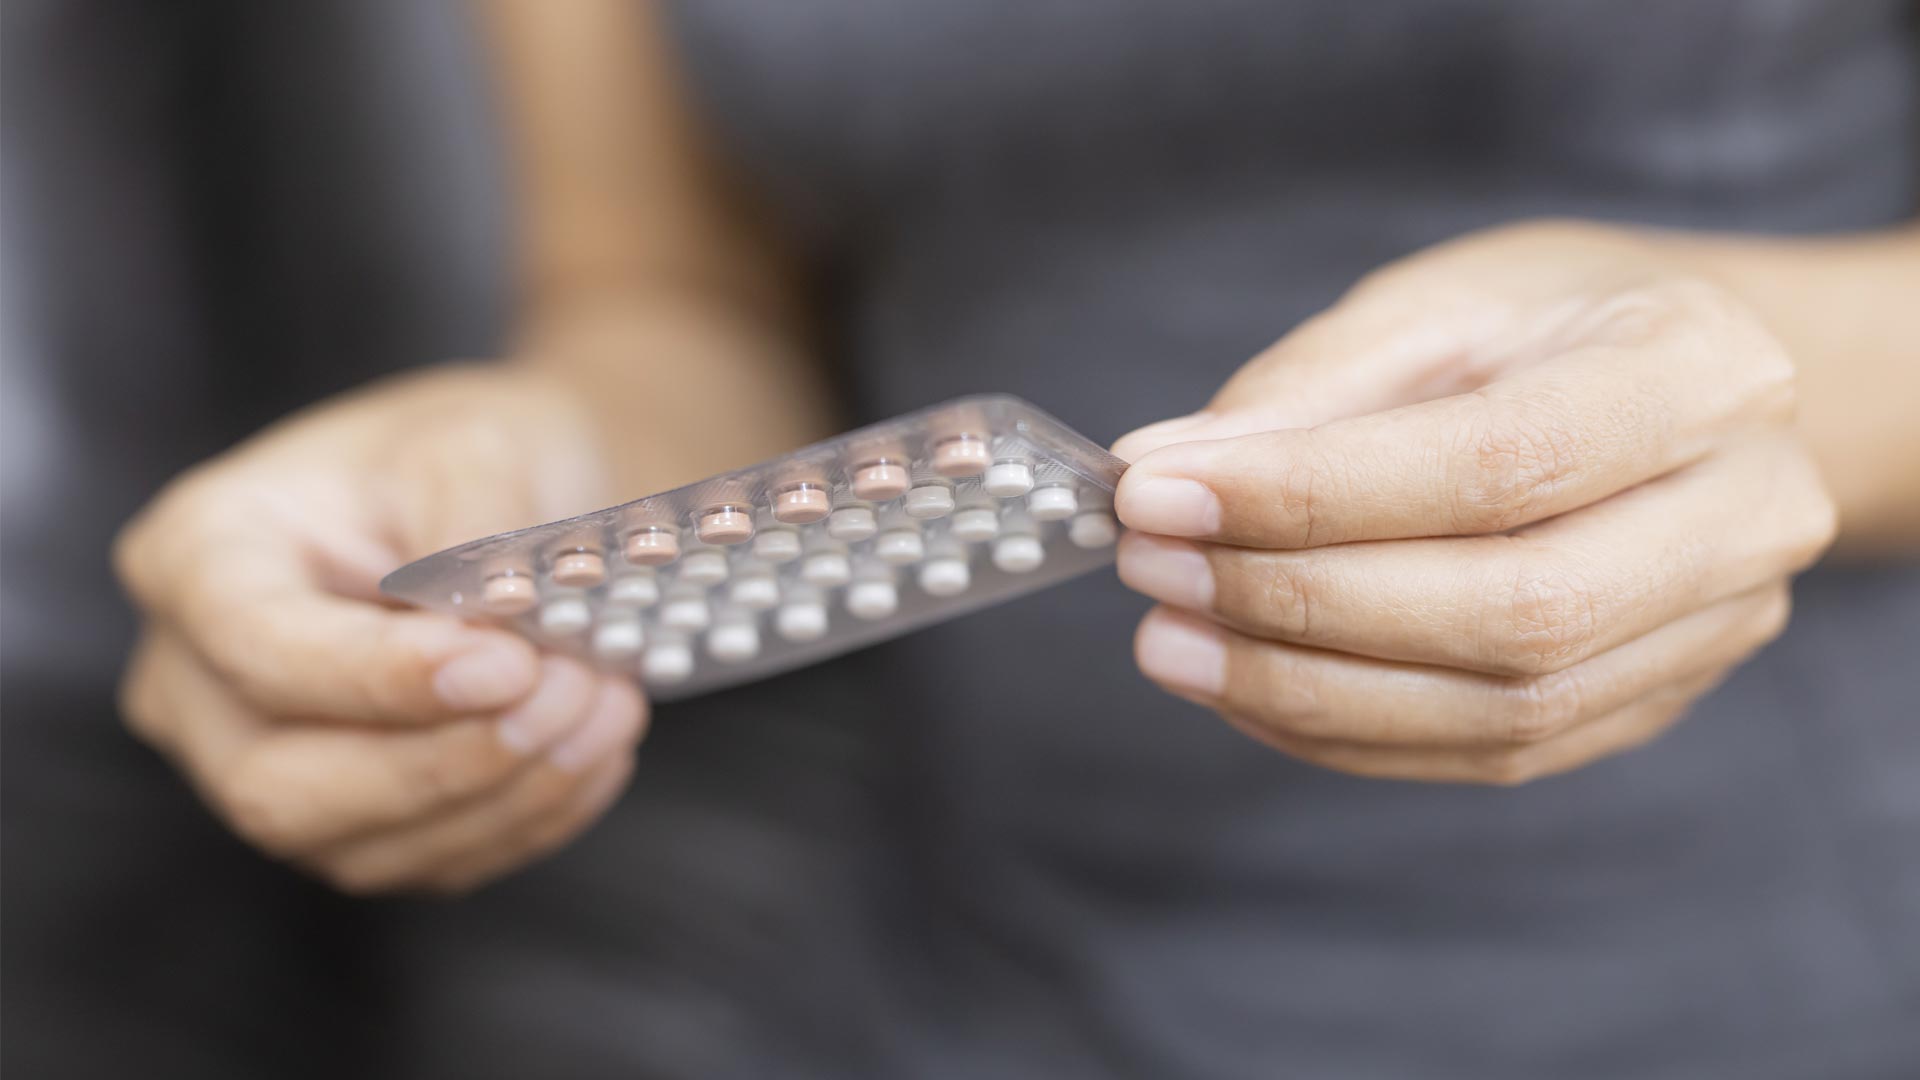 Oral Contraceptive Use Linked to Smaller Hypothalamus